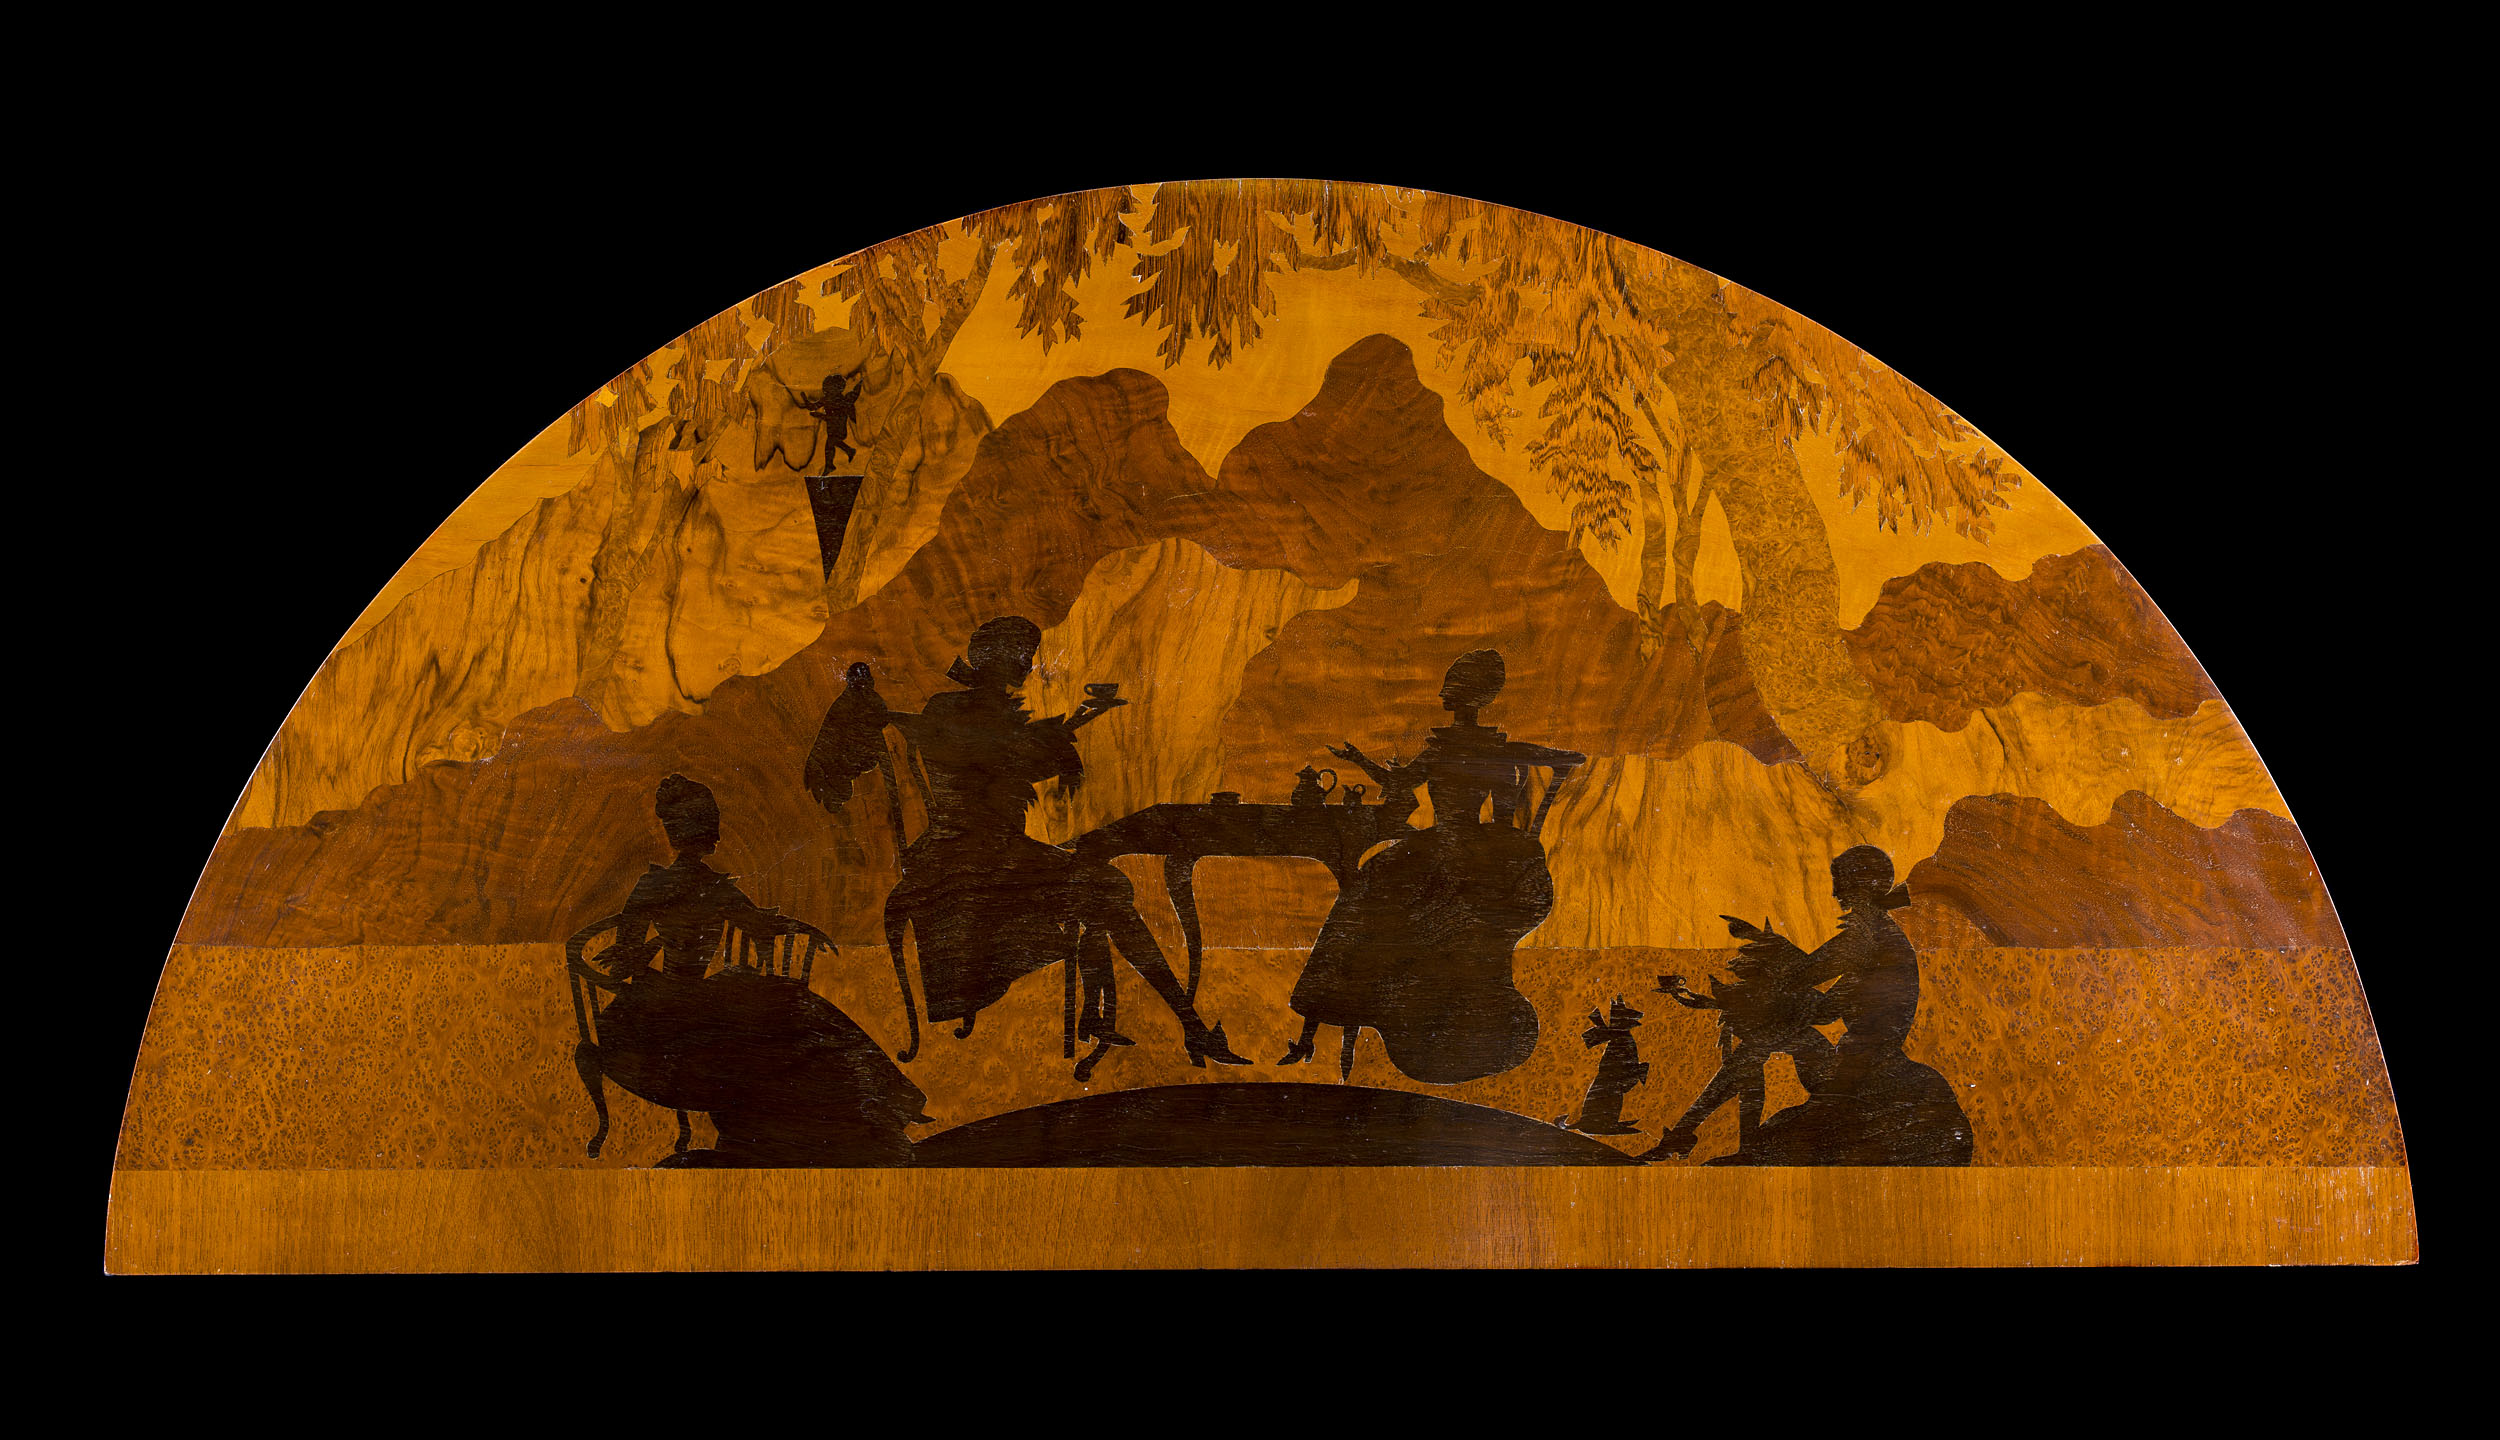 A Marquetry Wood Panel depicting a Fete Champetre Landscape 
